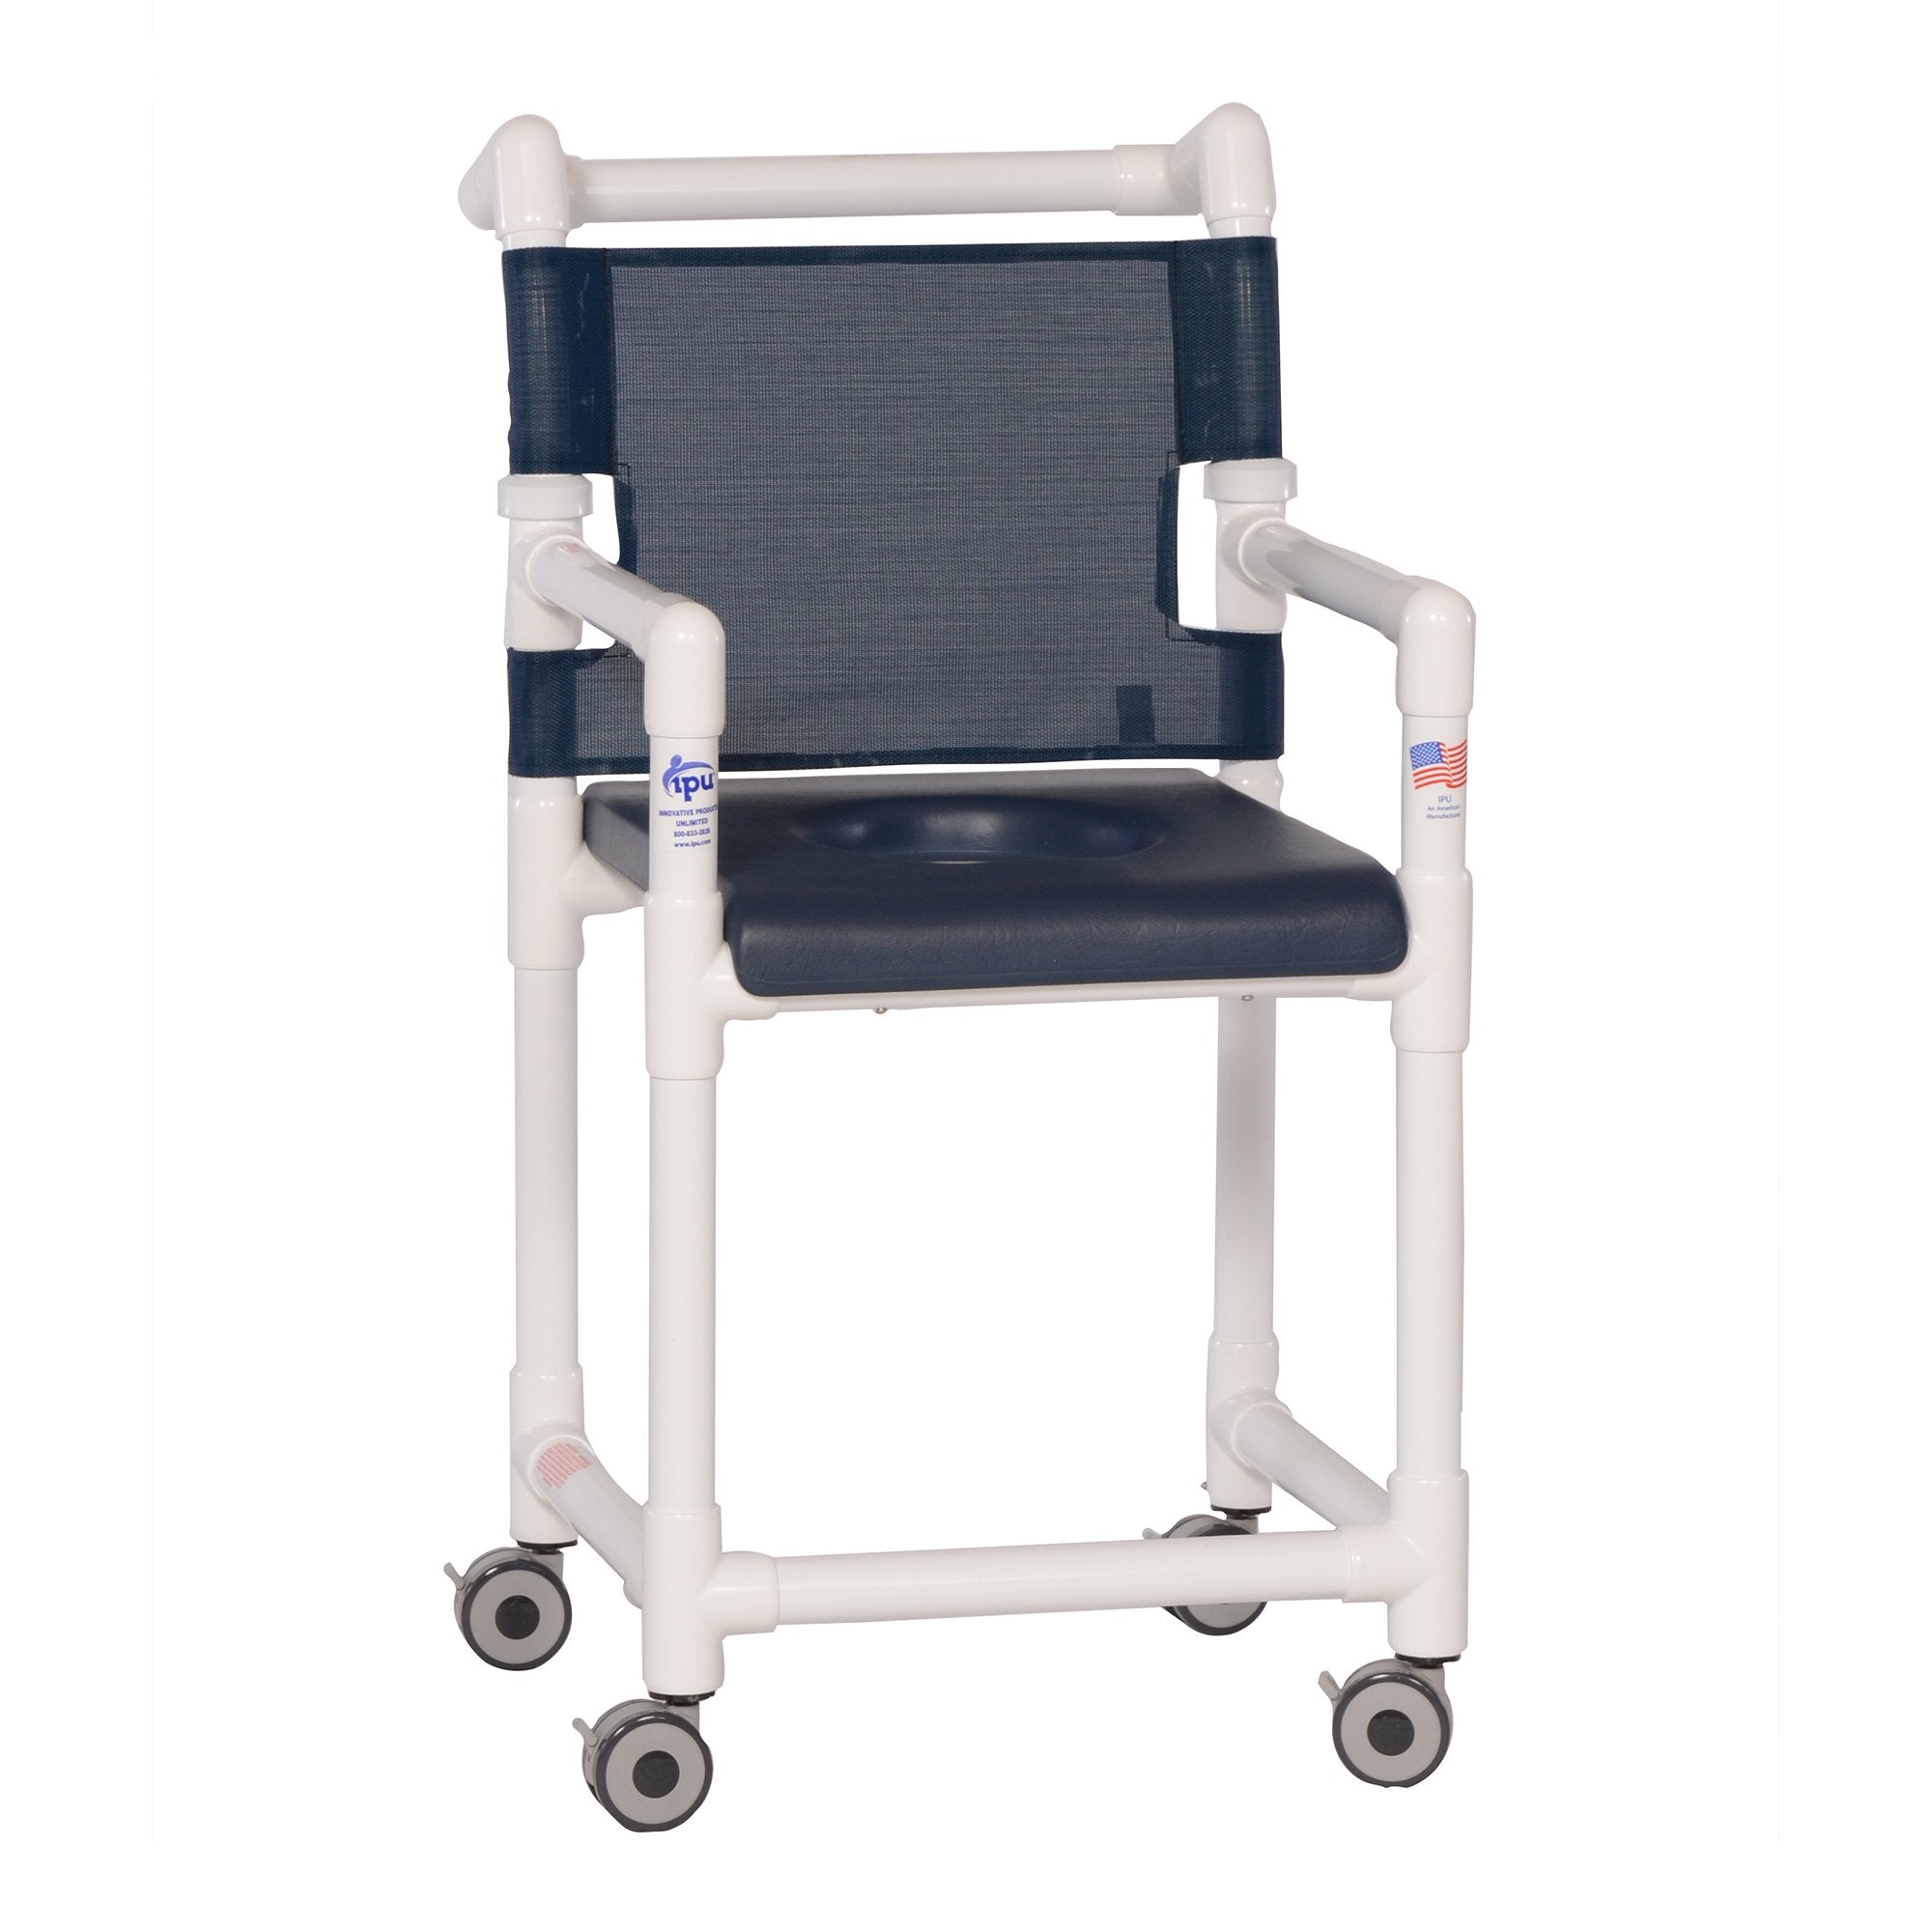 Shower Chair ipu® Fixed Arms PVC Frame Mesh Backrest 21 Inch Seat Width 300 lbs. Weight Capacity